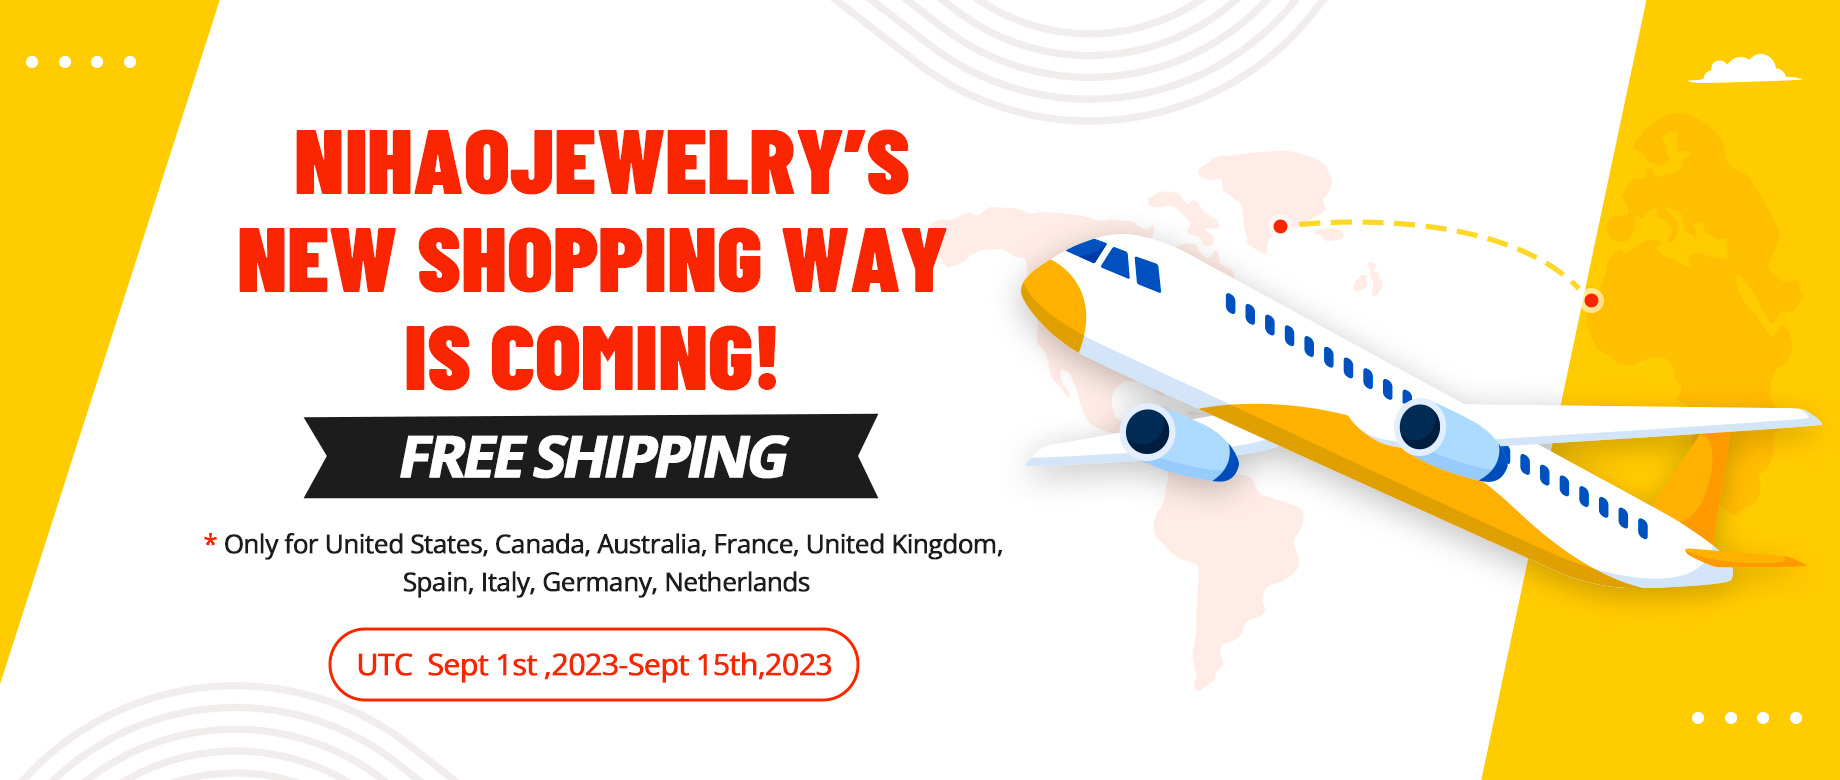 Nihaojewelry’s new shopping way is coming!